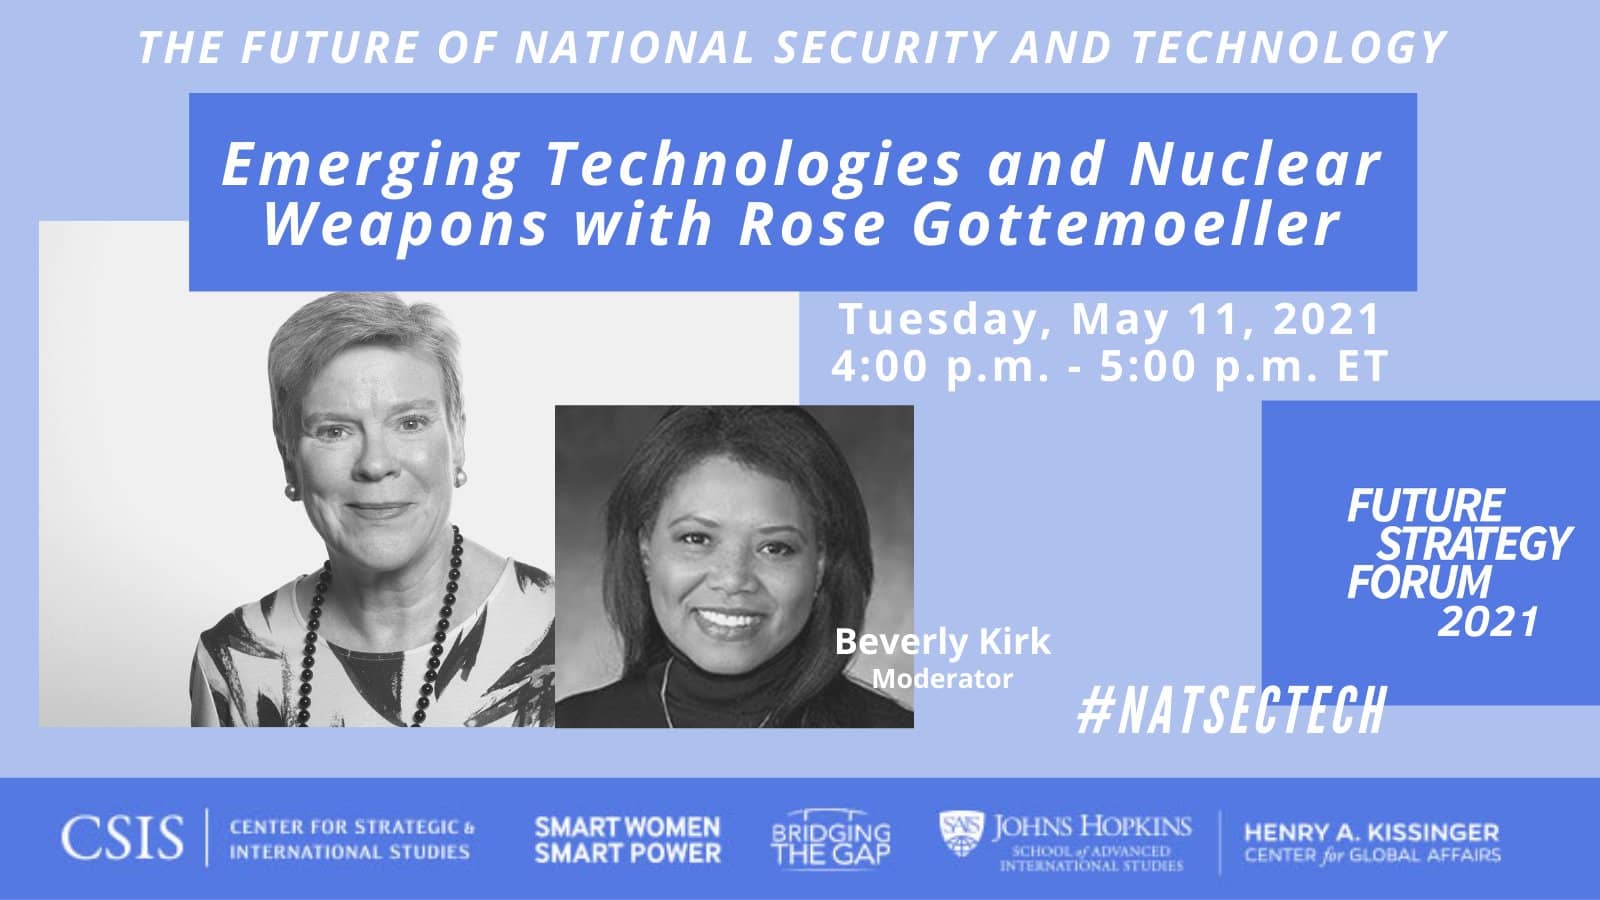 The Future of National Security and Technology, Emerging Technologies and Nuclear Weapons with Rose Gottemoeller, Tuesday, May 11, 2021, 4:00 p.m. - 5:00 p.m. ET, #NATSECTECH. (Sponsors:) Center for Strategic and International Studies; Smart Women, Smart Power; Bridging the Gap; Johns Hopkins University School of Advanced International Studies, Henry A. Kissinger Center for Global Affairs